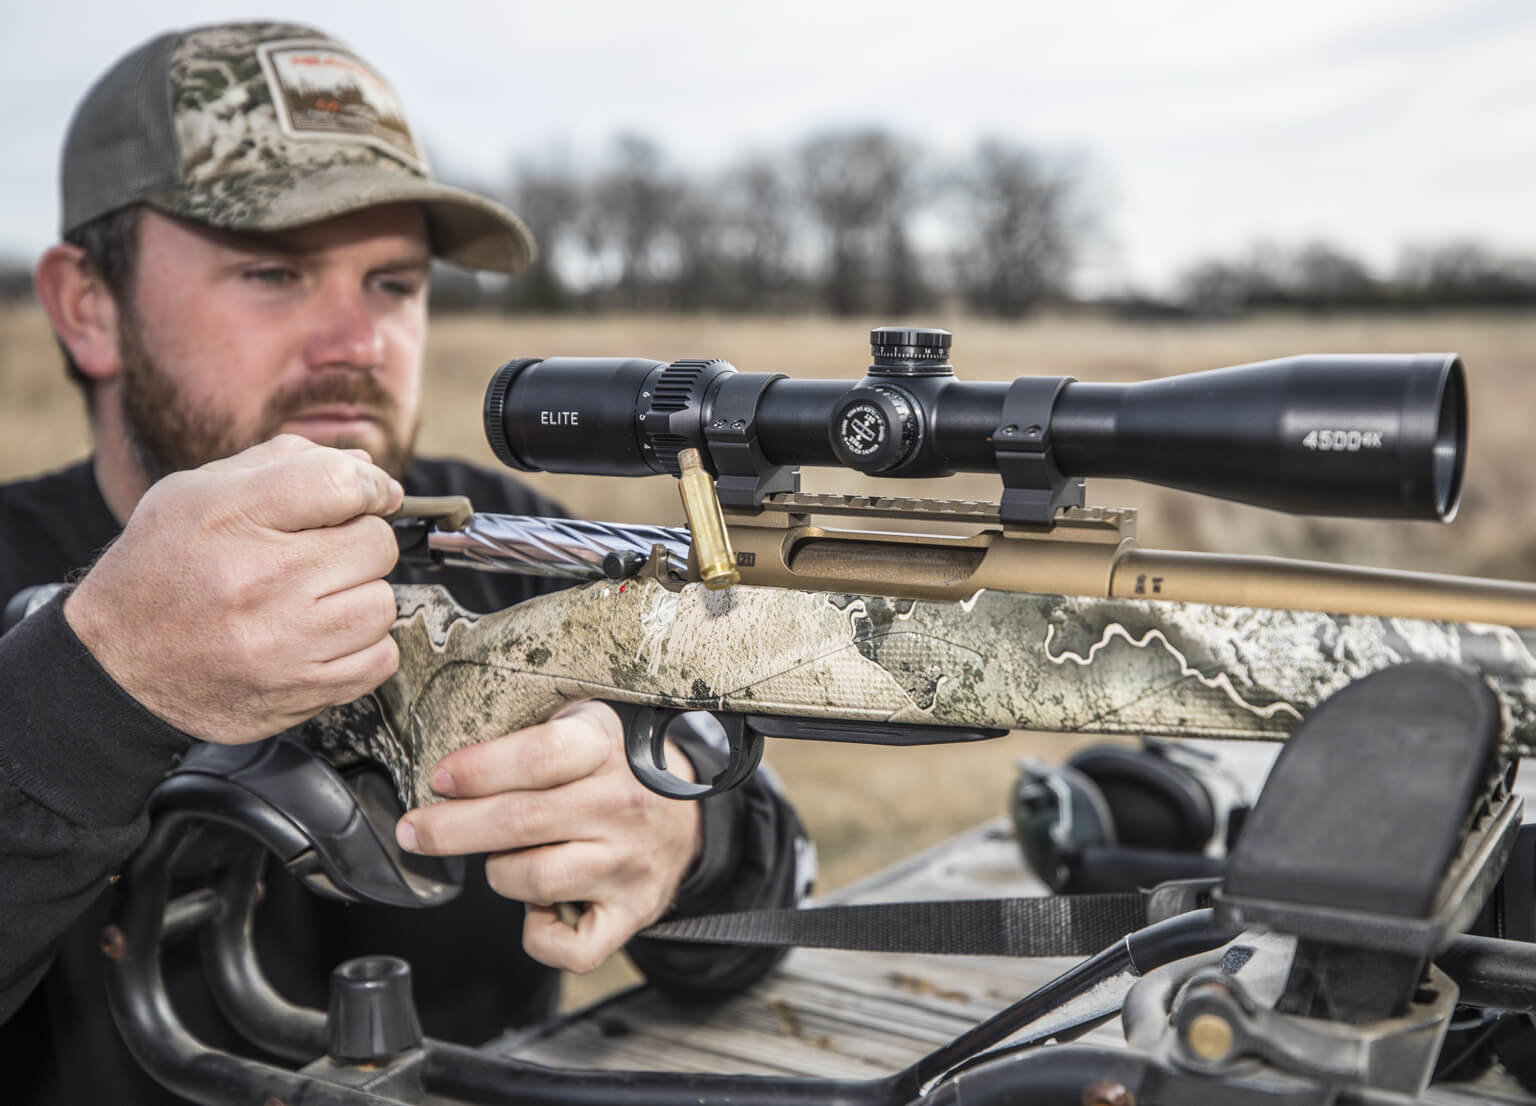 Hunter in a field sighting-in his rifle with a Bushnell Riflescope